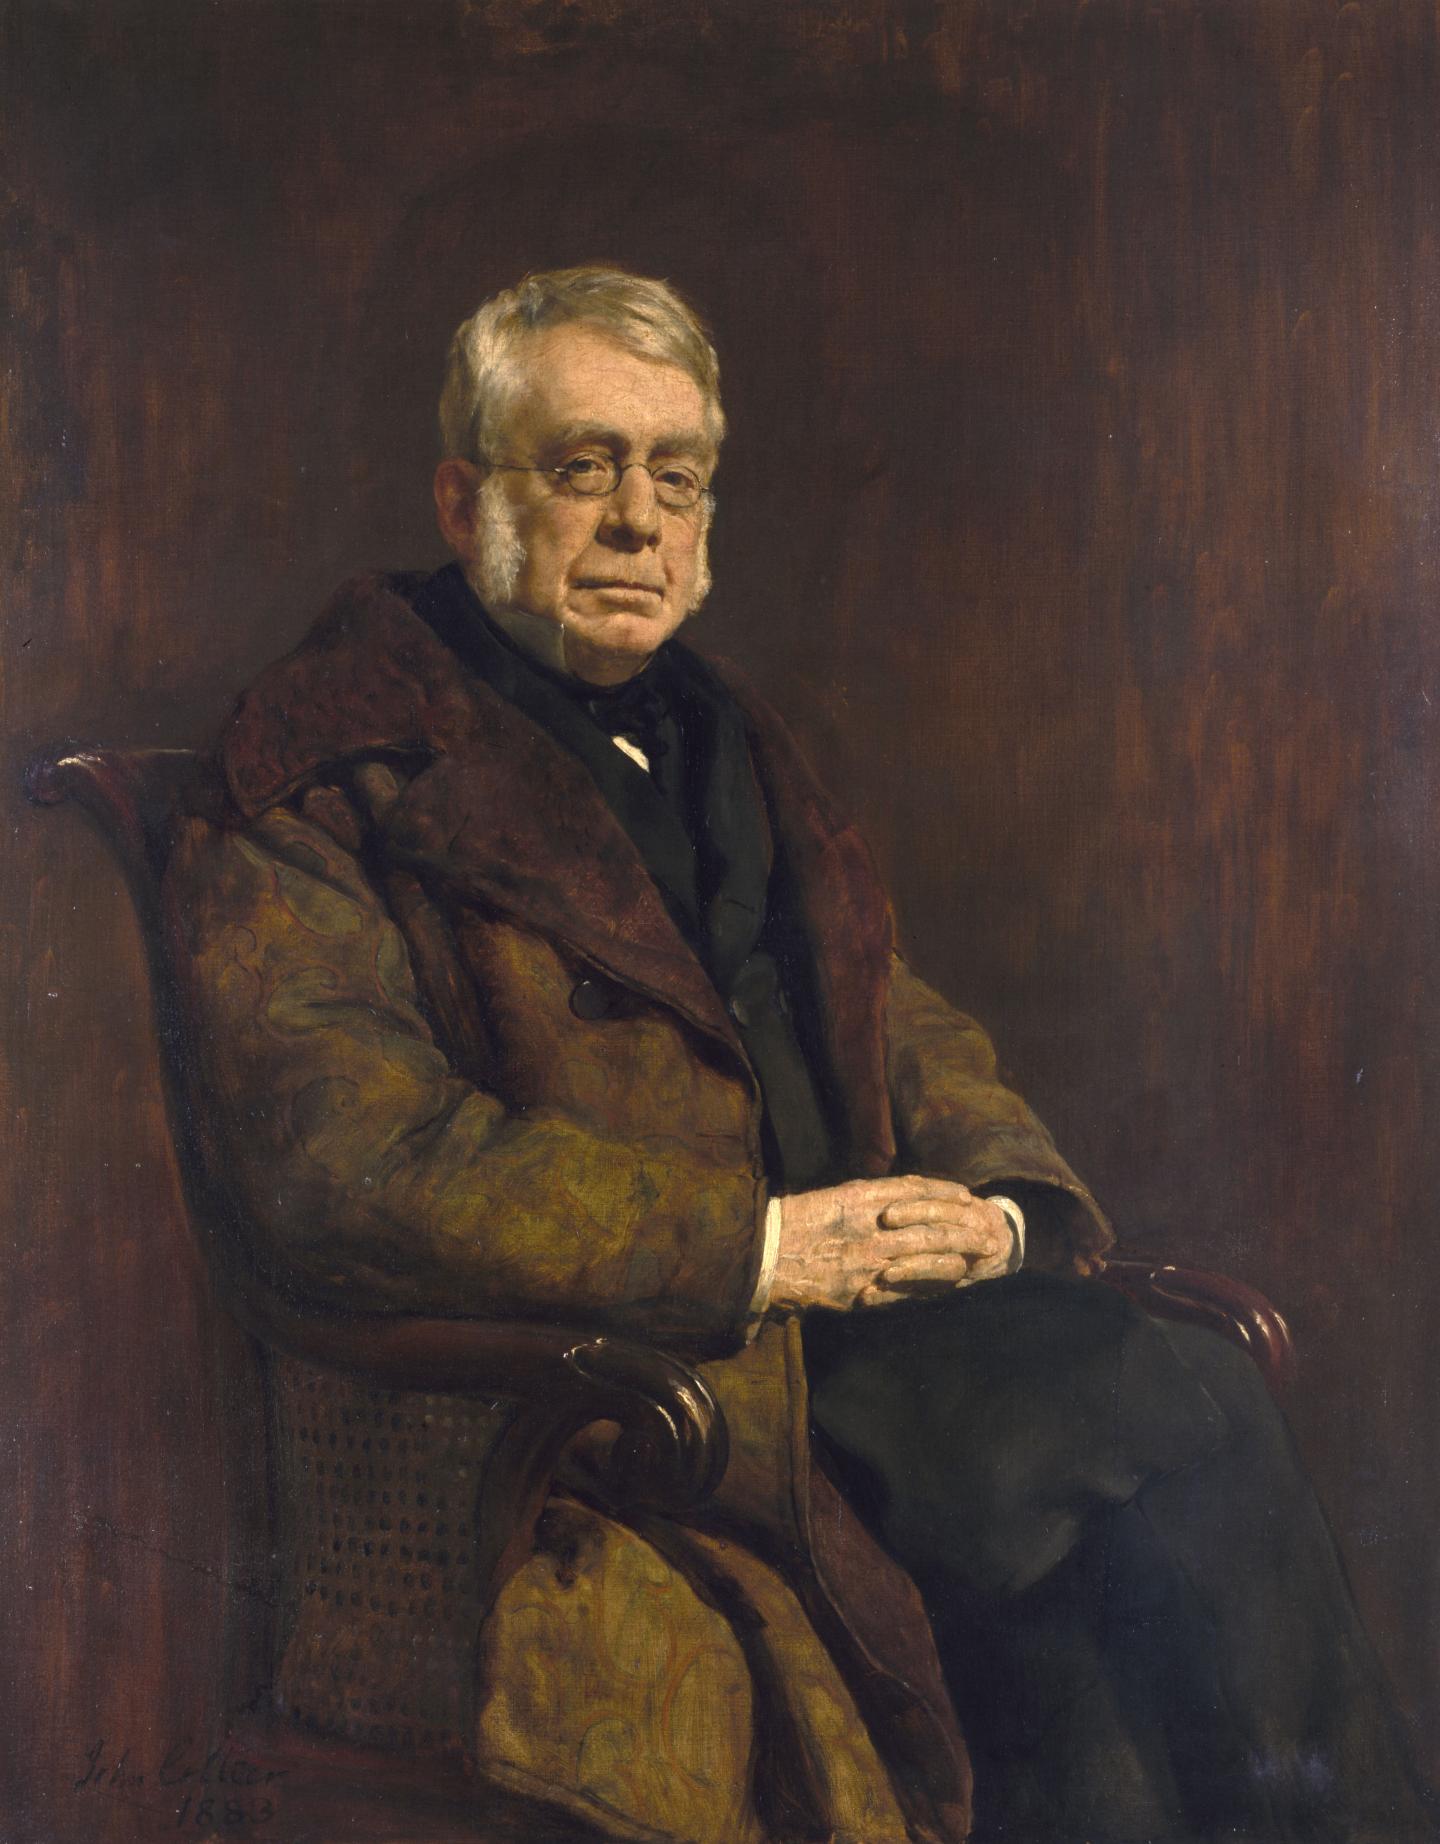 Sir George Biddell Airy (1801-1892) by John Collier (1883)